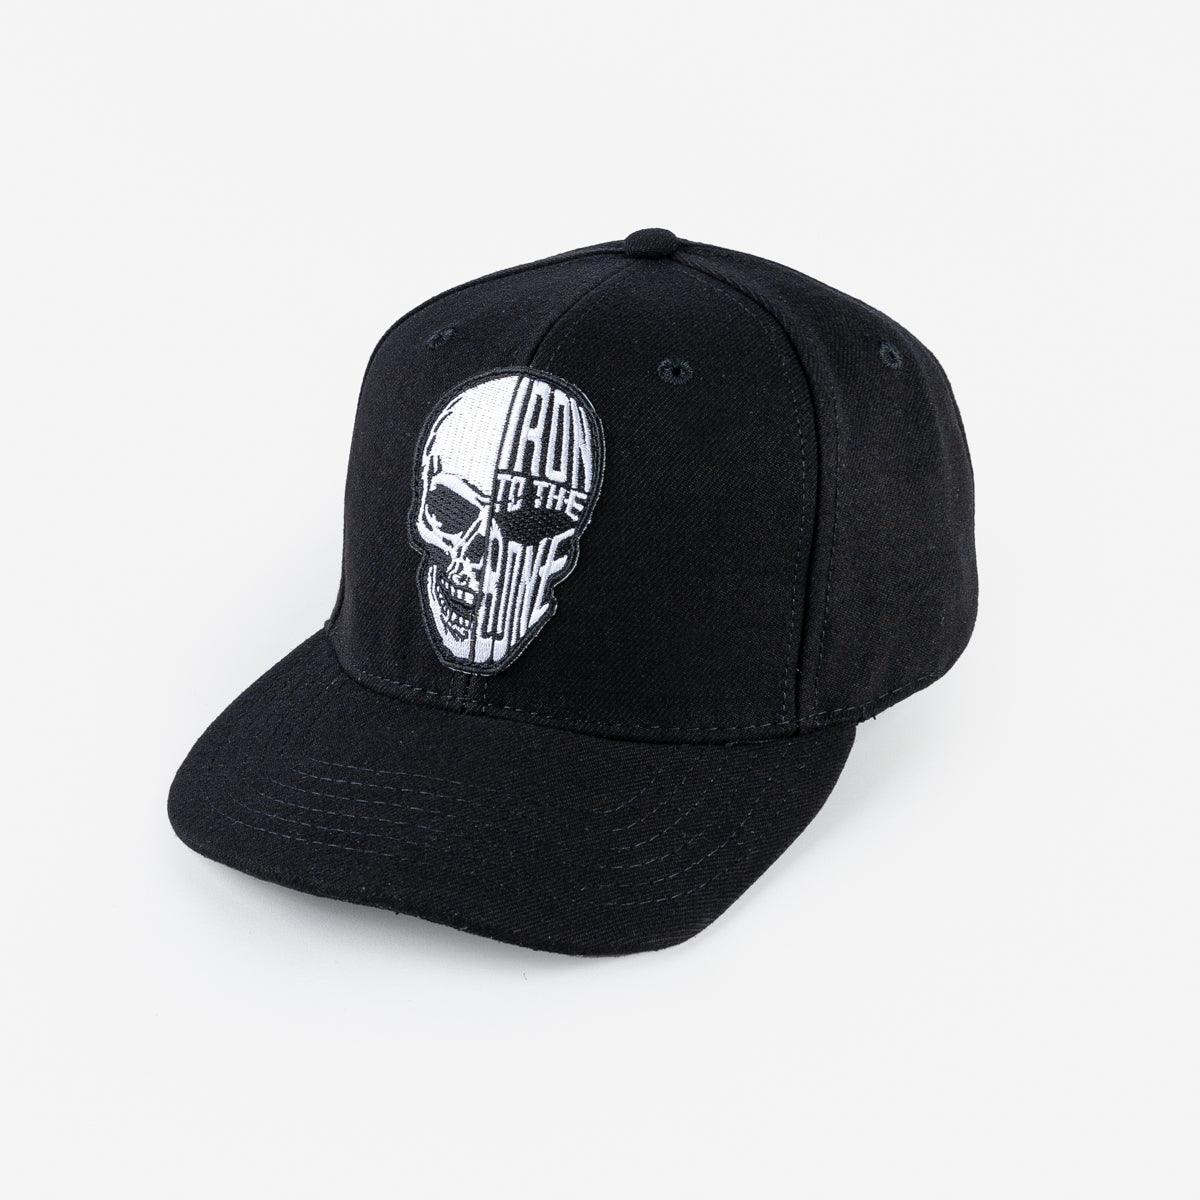 Image showing the IHC-19-ITTB - Iron Heart IRON TO THE BONE Snapback Cap - Black which is a Headgear described by the following info Accessories, Headgear, Iron Heart, Released and sold on the IRON HEART GERMANY online store